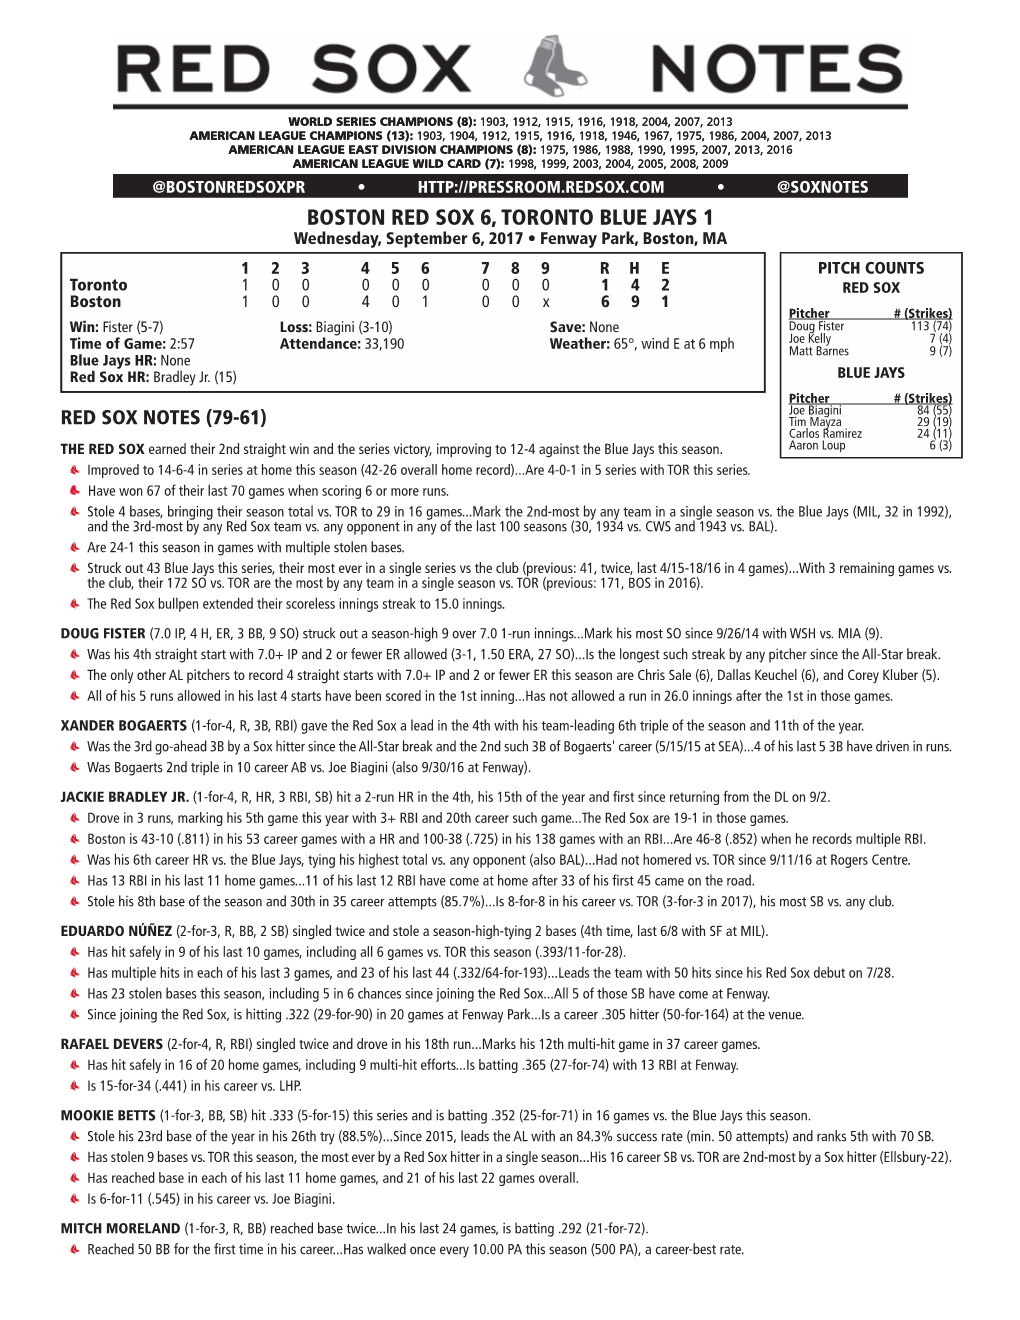 Post-Game Notes 906 Vs. TOR.Indd